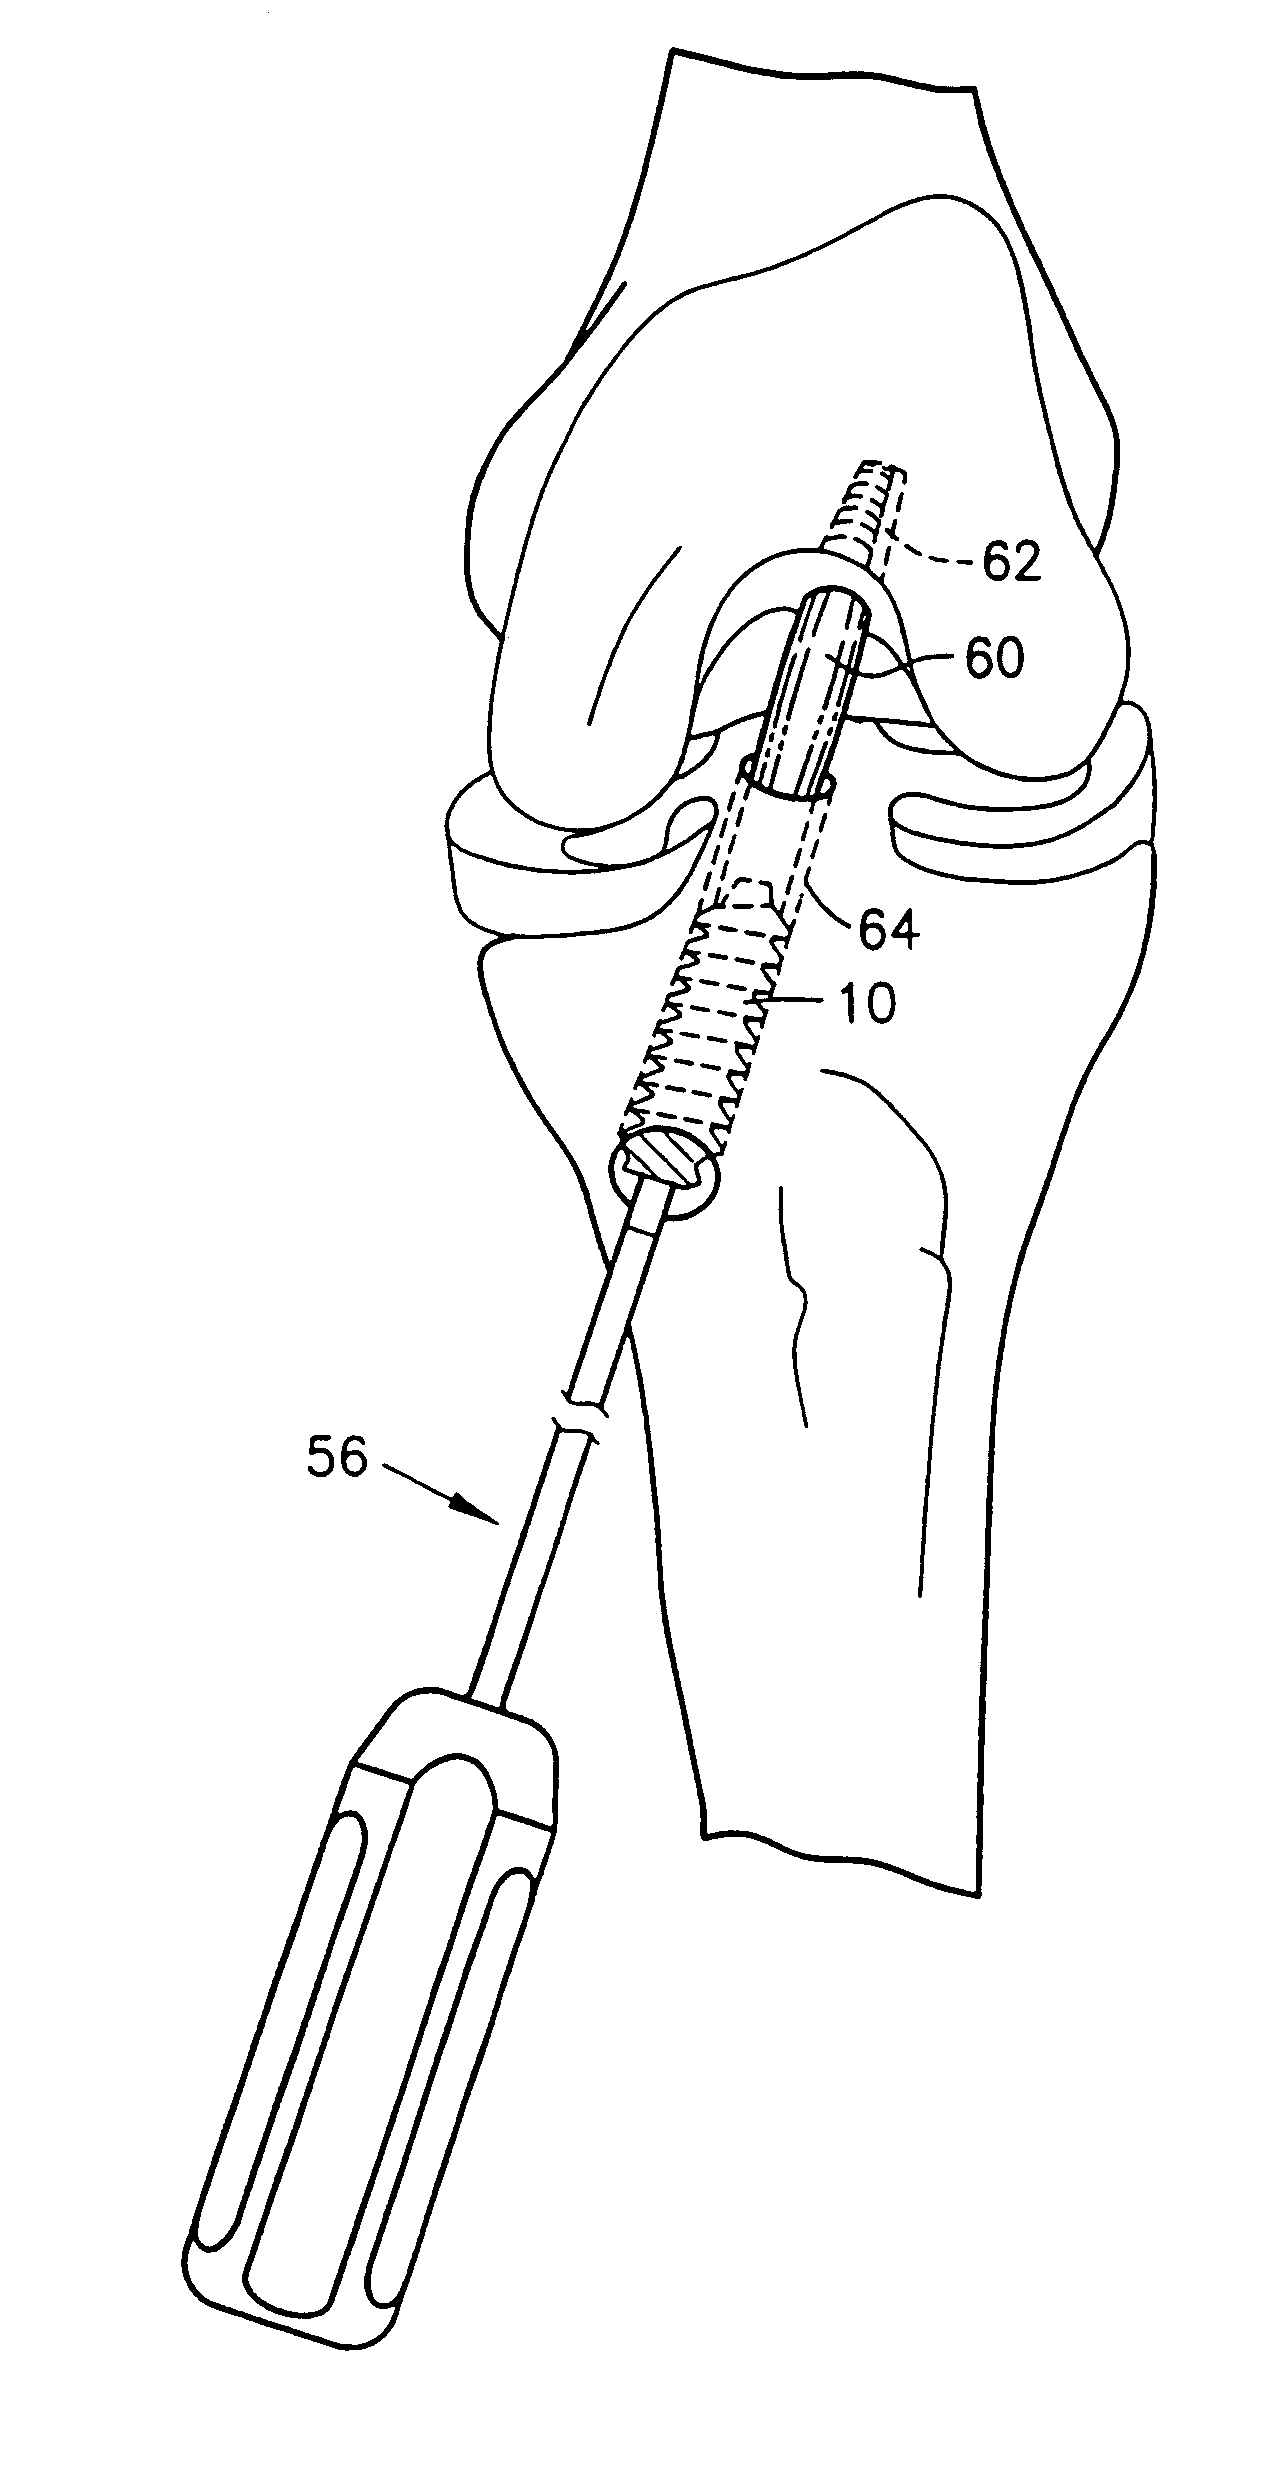 Bioabsorbable interference screw for endosteal fixation of ligaments